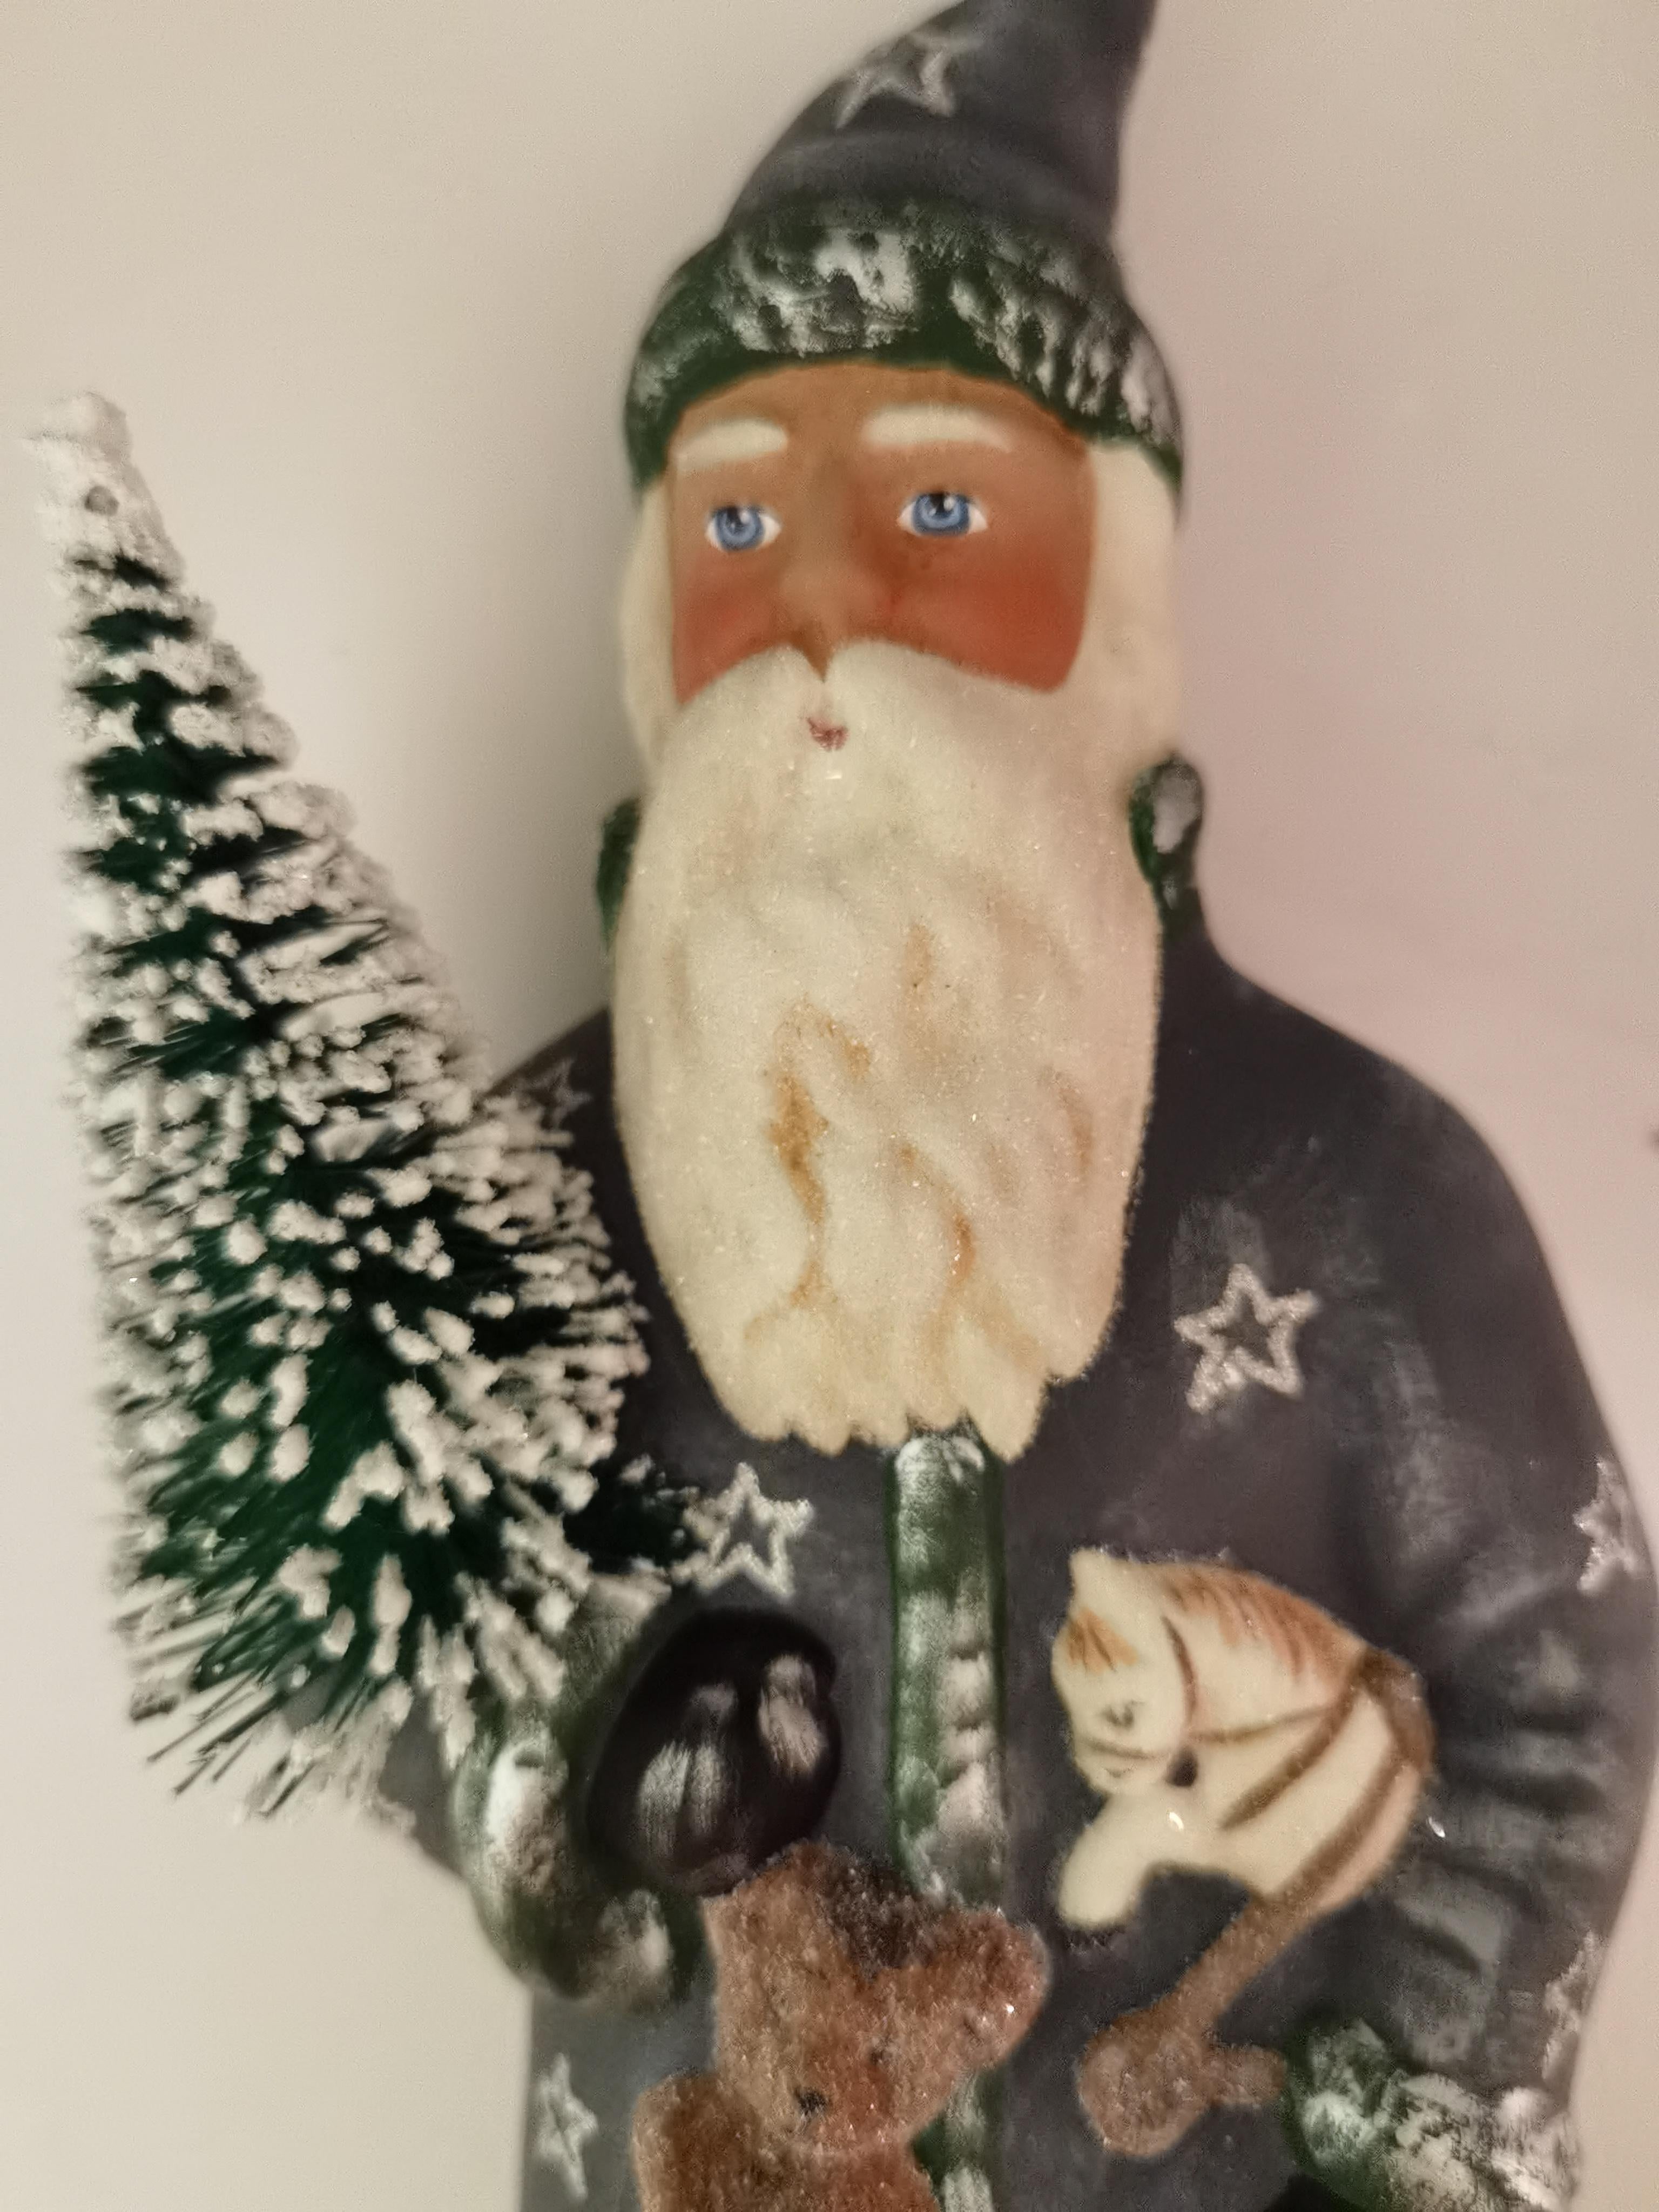 Santa Claus figure in hand painted gold papier mâché decorated with stars and a hand painted detailed face holding a tree. The Santa Claus is handmade in a original antique mould in Germany.